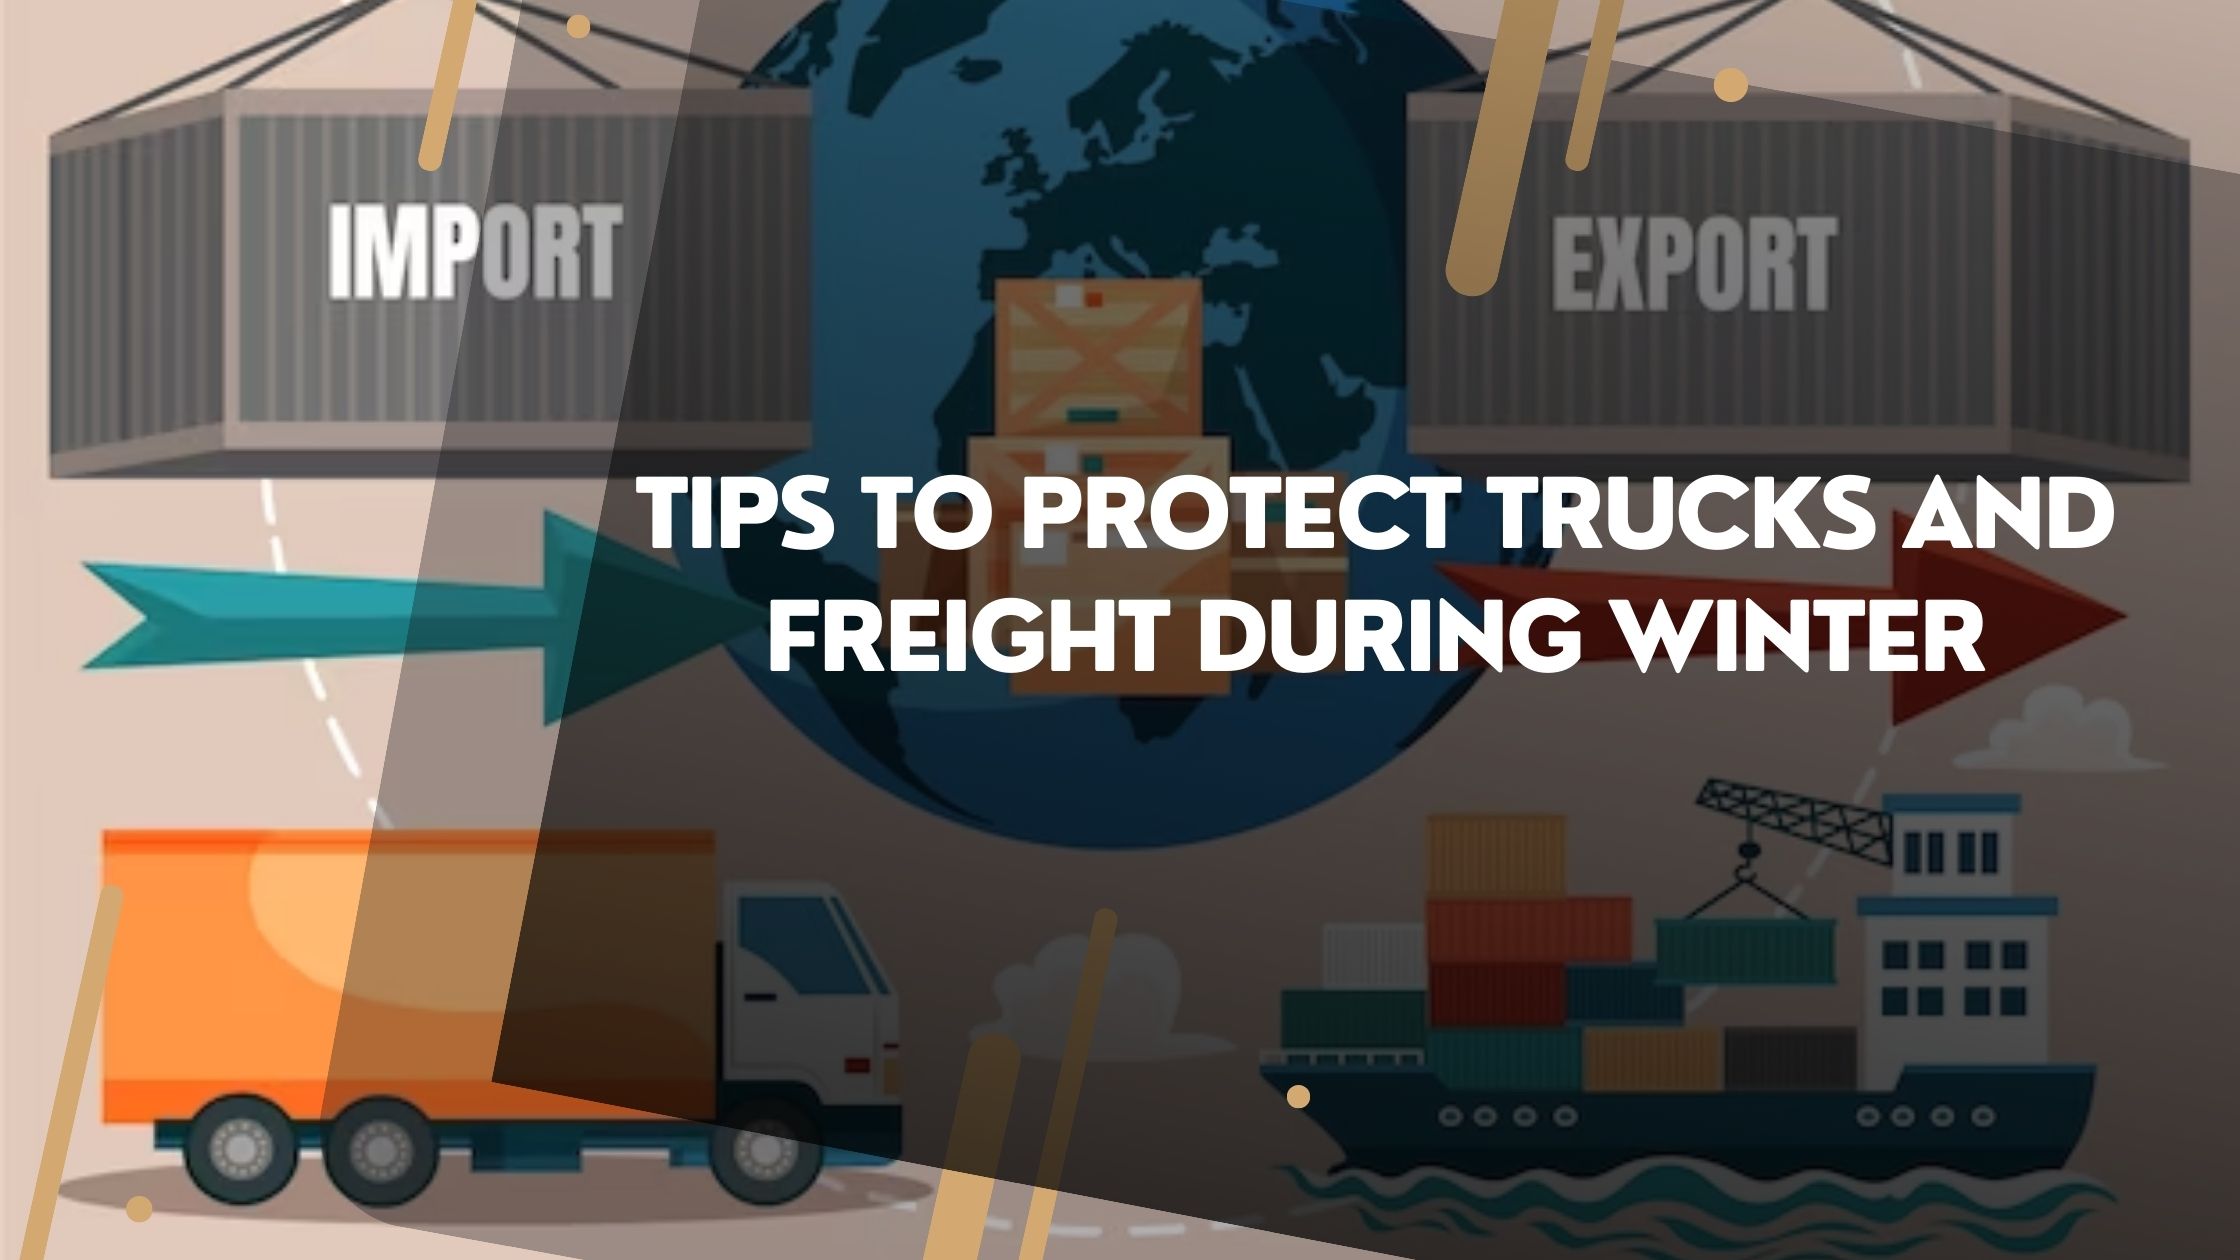 Tips to Protect Trucks and Freight During Winter